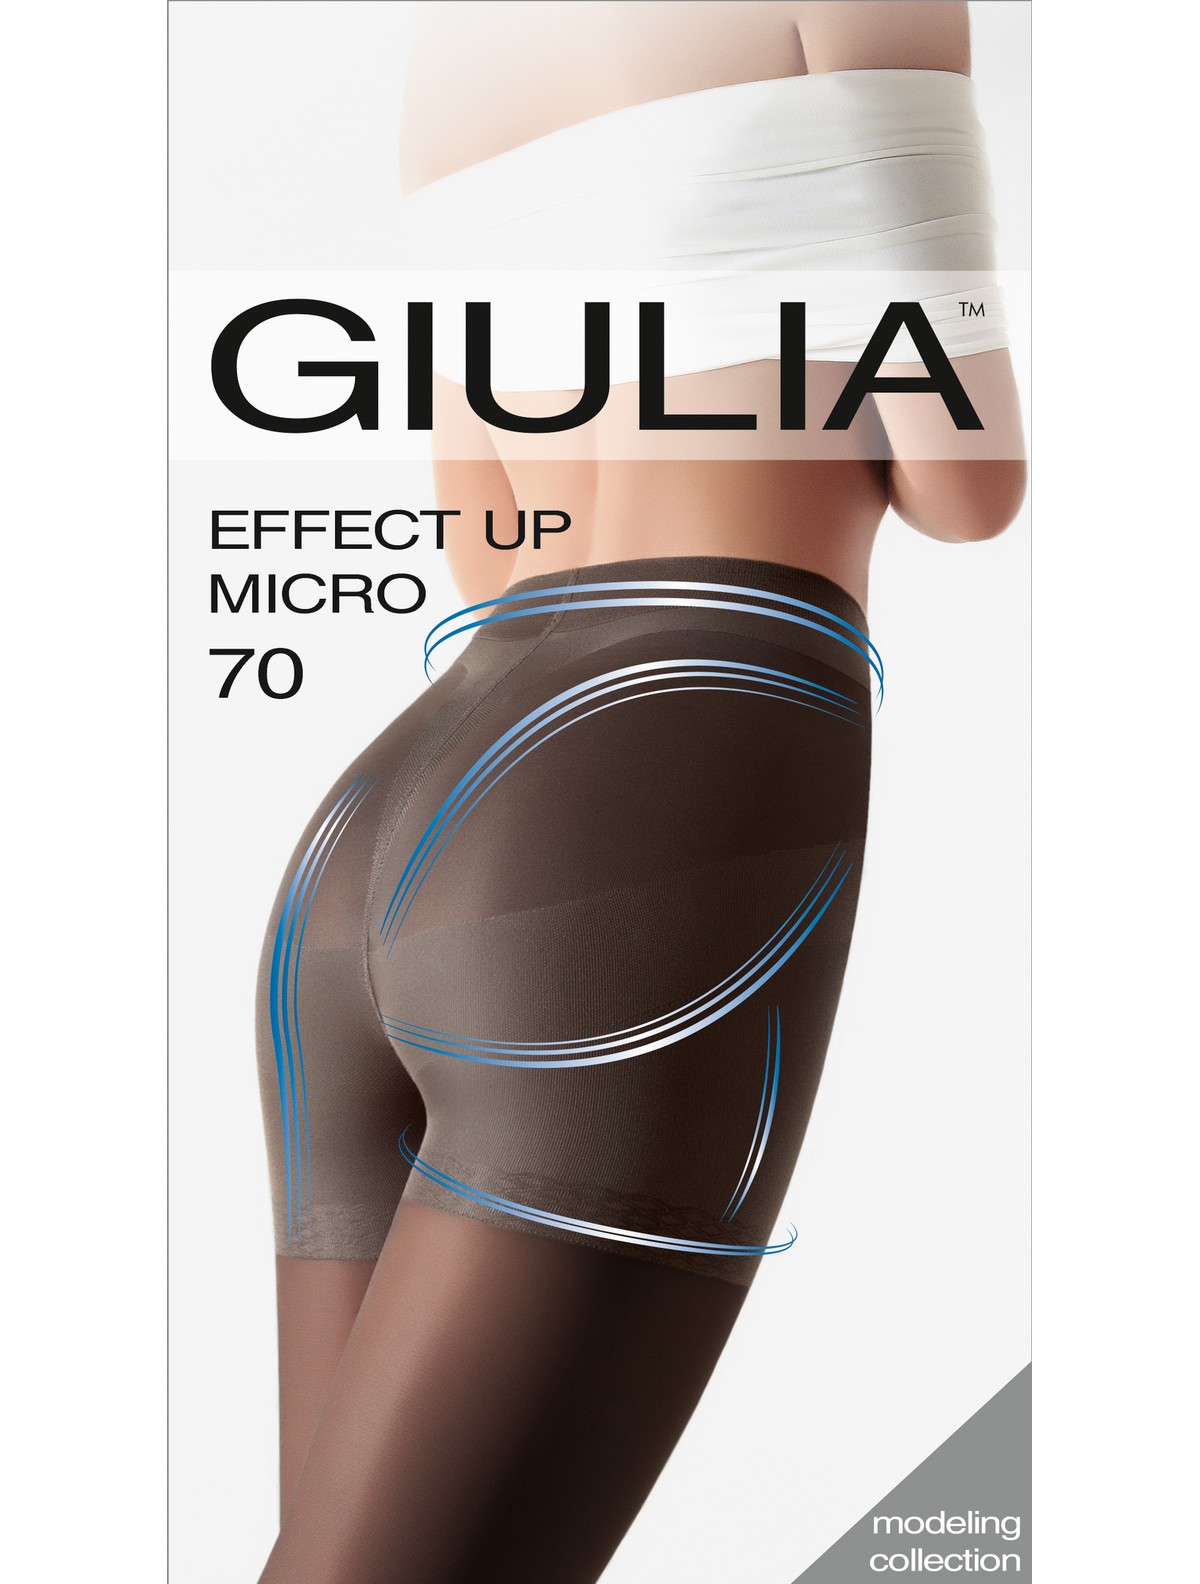 GIULIA 70 UP tights EFFECT shaping